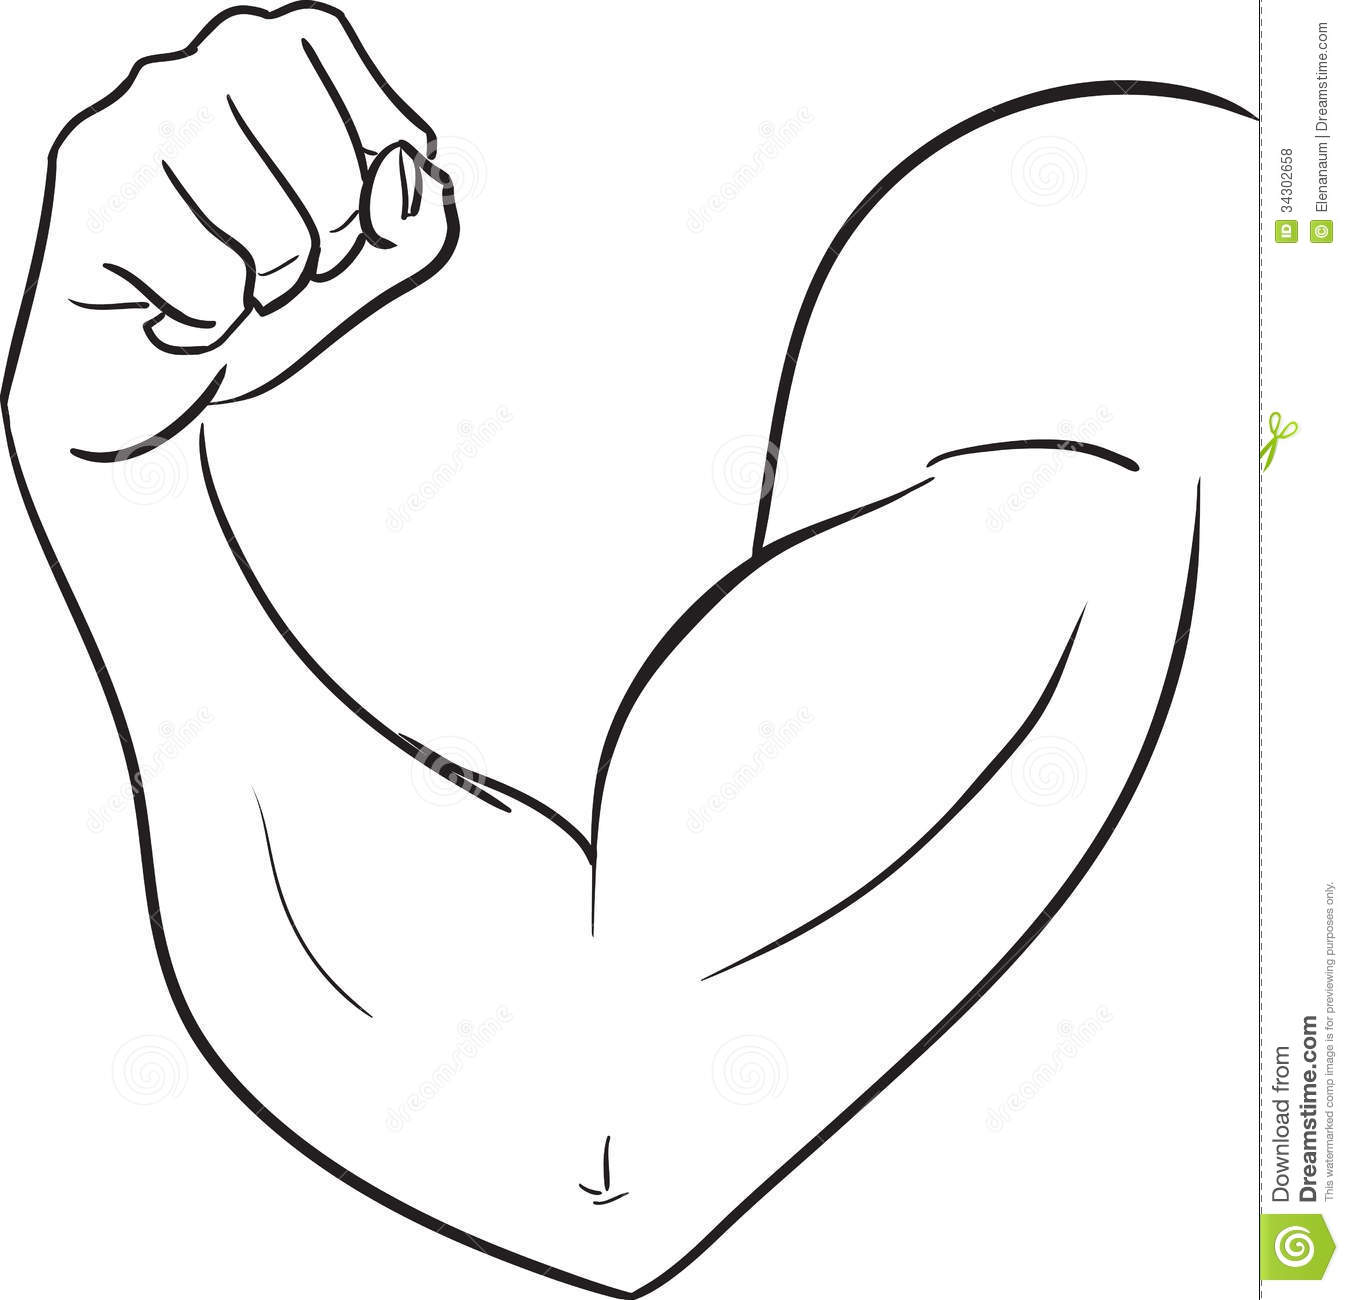 Arm clipart black and white. Muscle 